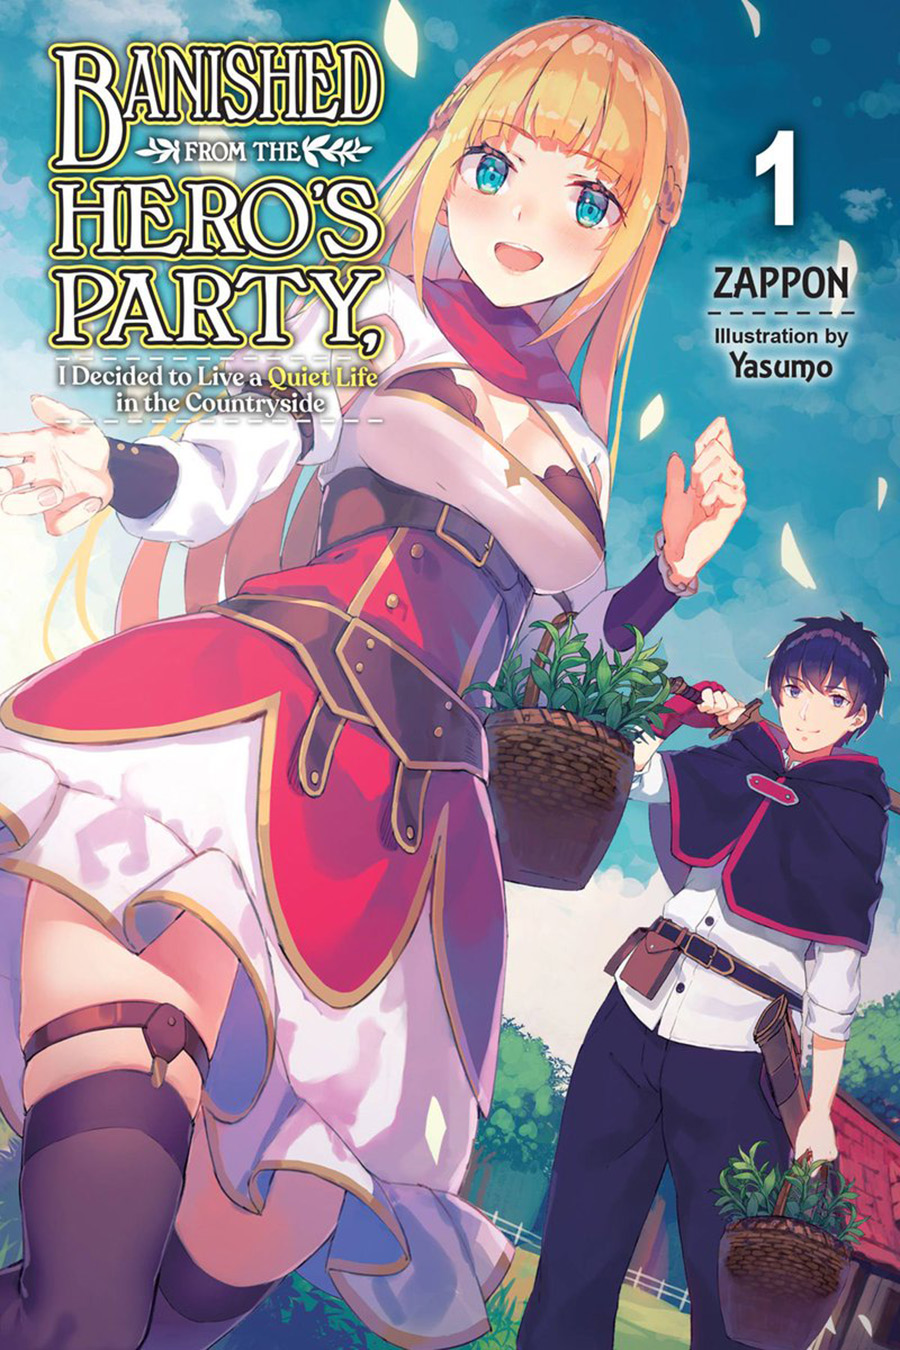 Banished From The Heros Party I Decided To Live A Quiet Life In The Countryside Light Novel Vol 1 TP